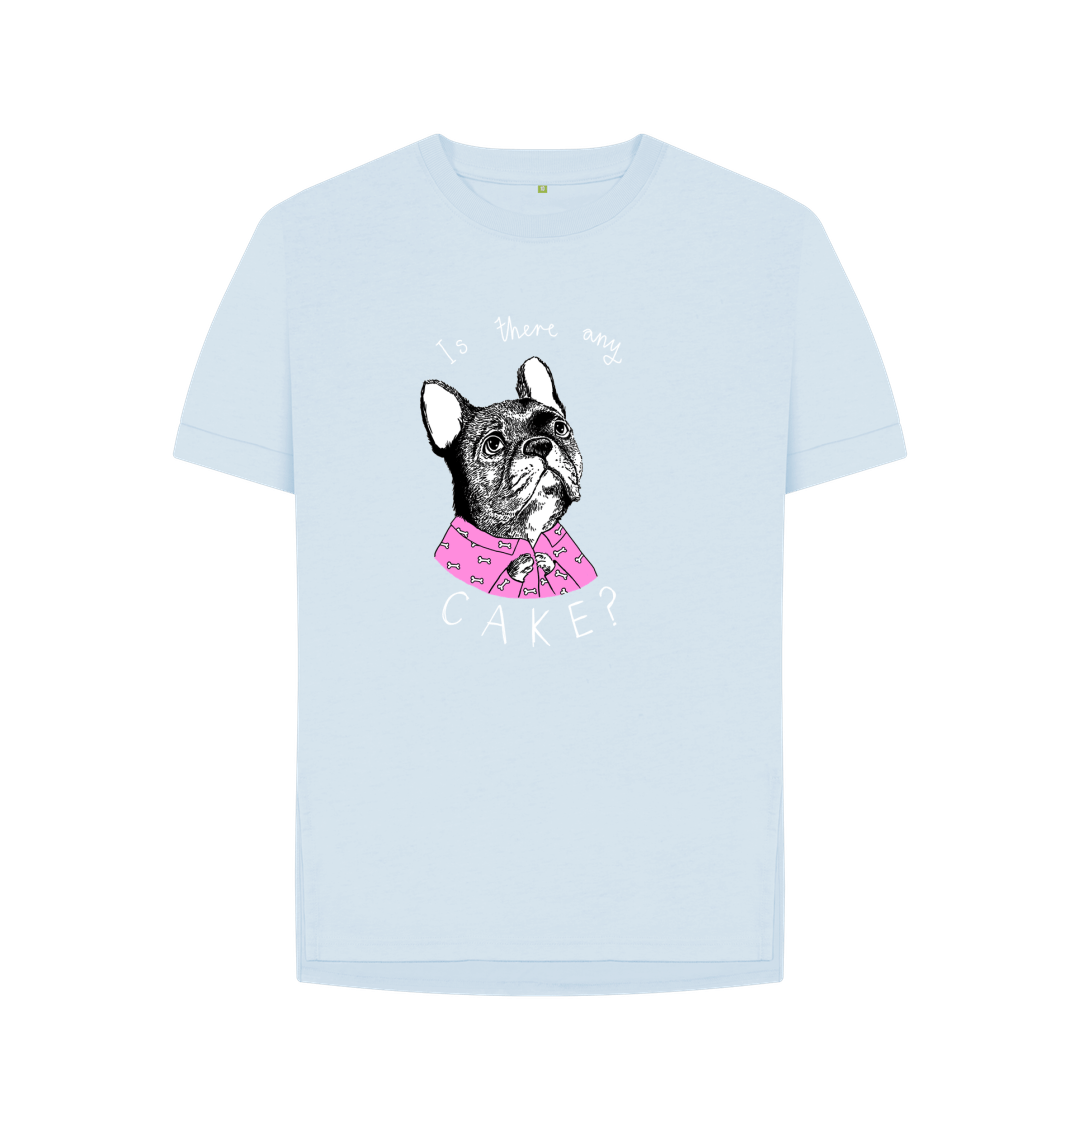 Sky Blue 'Is There Any Cake?' Women's T-shirt